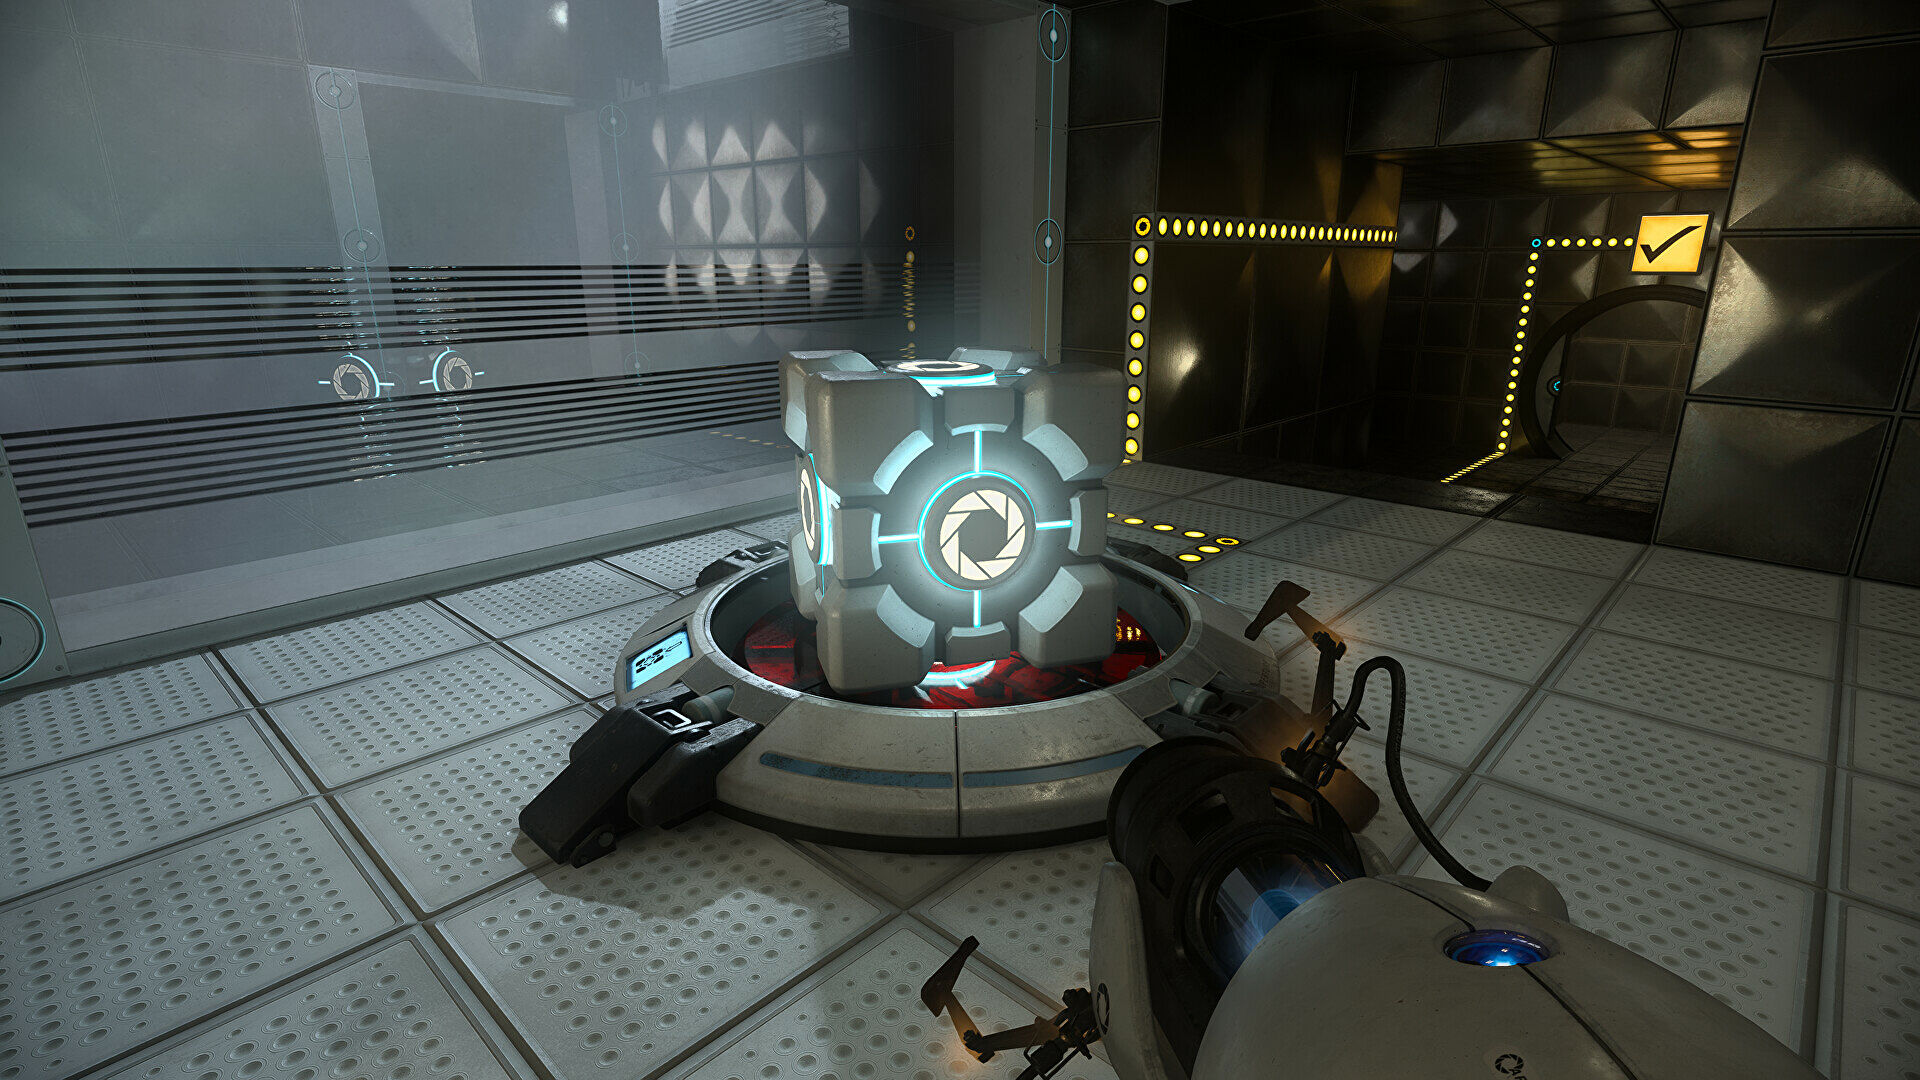 Portal with RTX is launching December 8th, and there’s a shiny new trailer